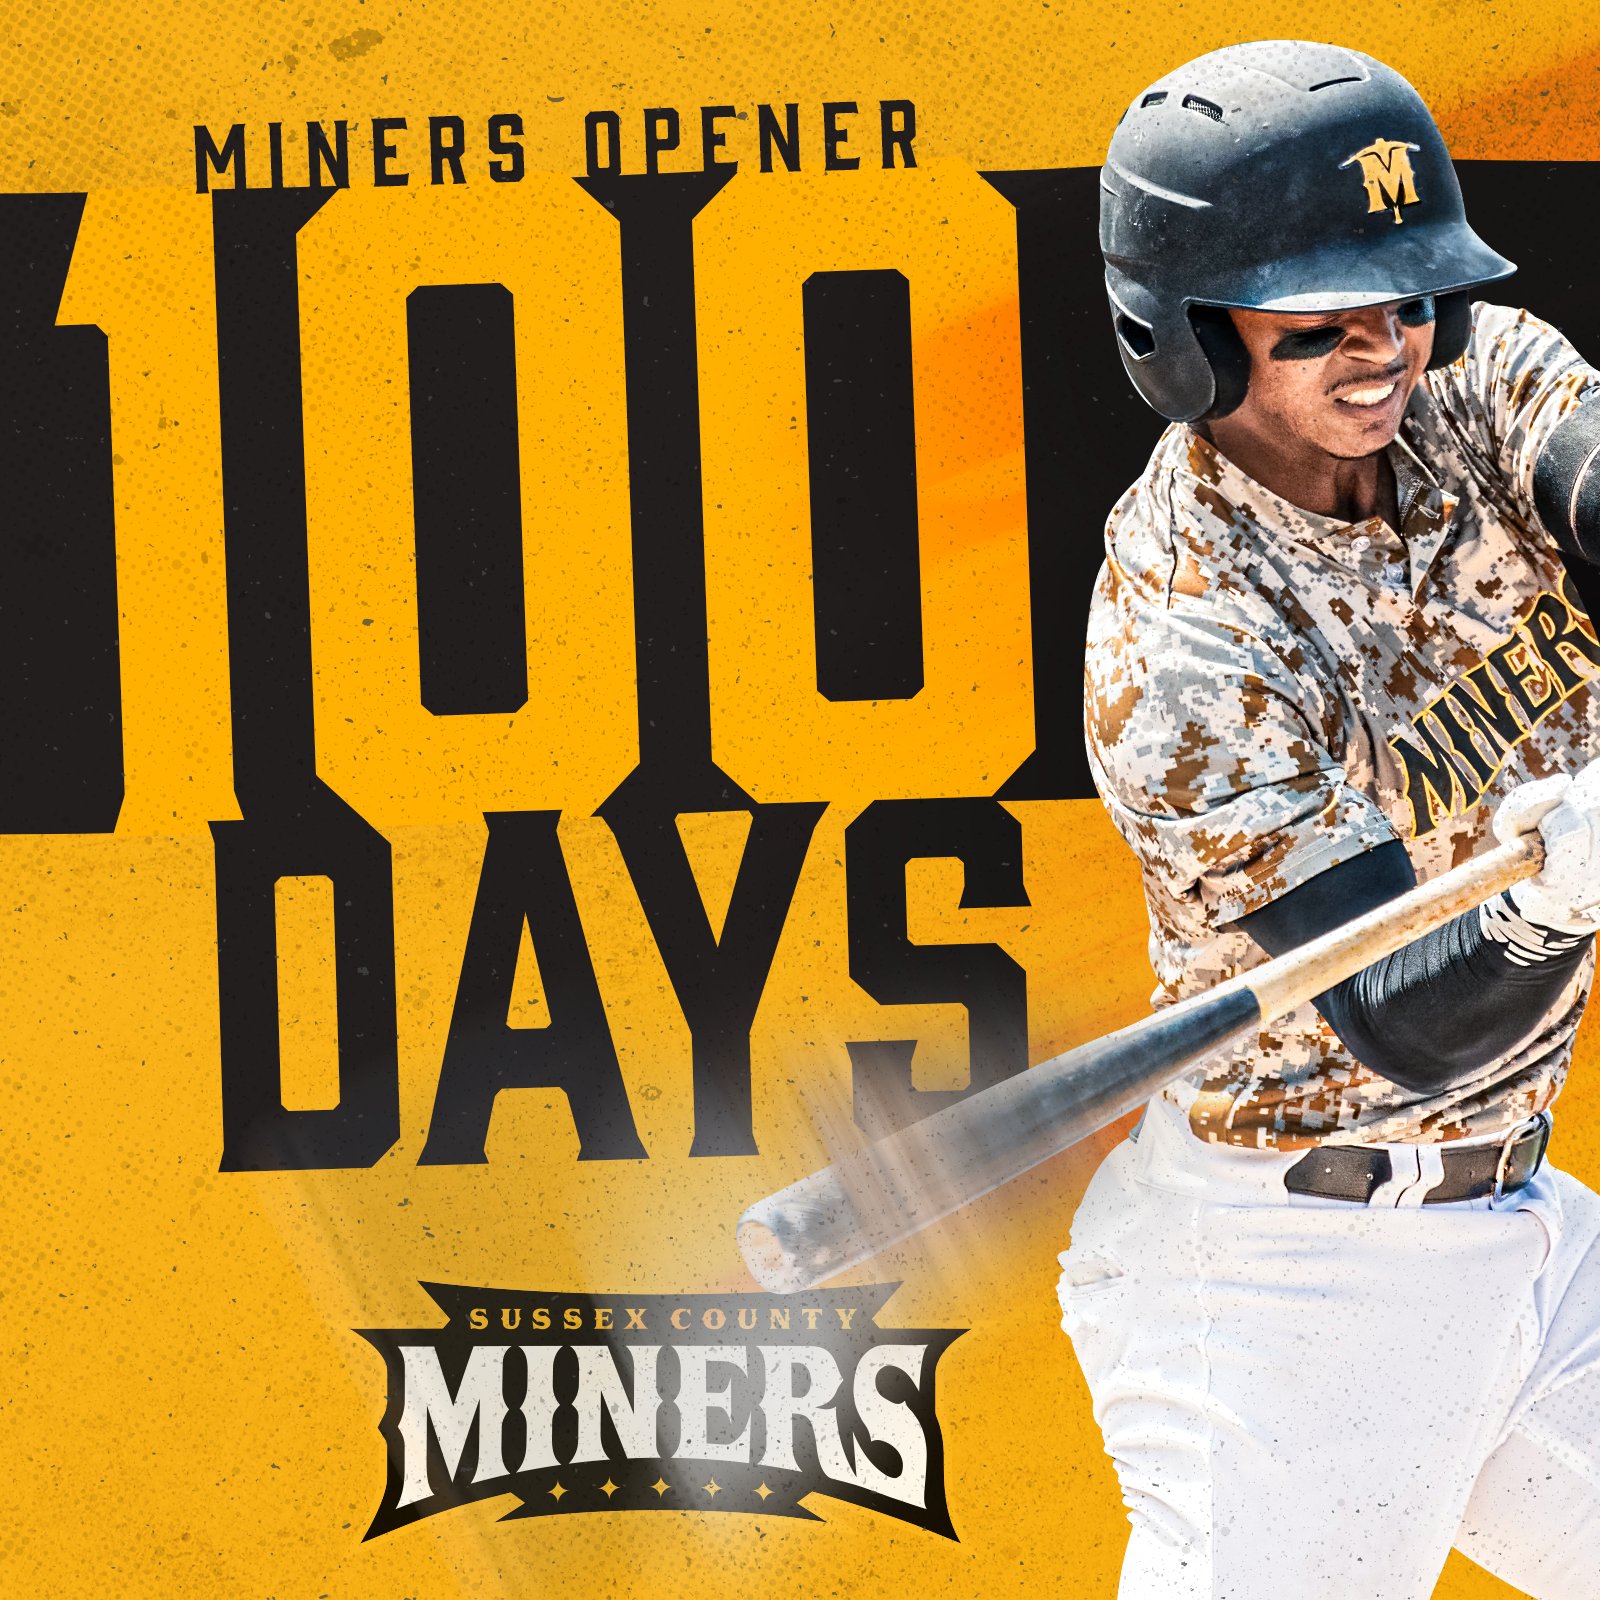 Miners Baseball Schedule 2022 Sussex County Miners (@Scminers) / Twitter